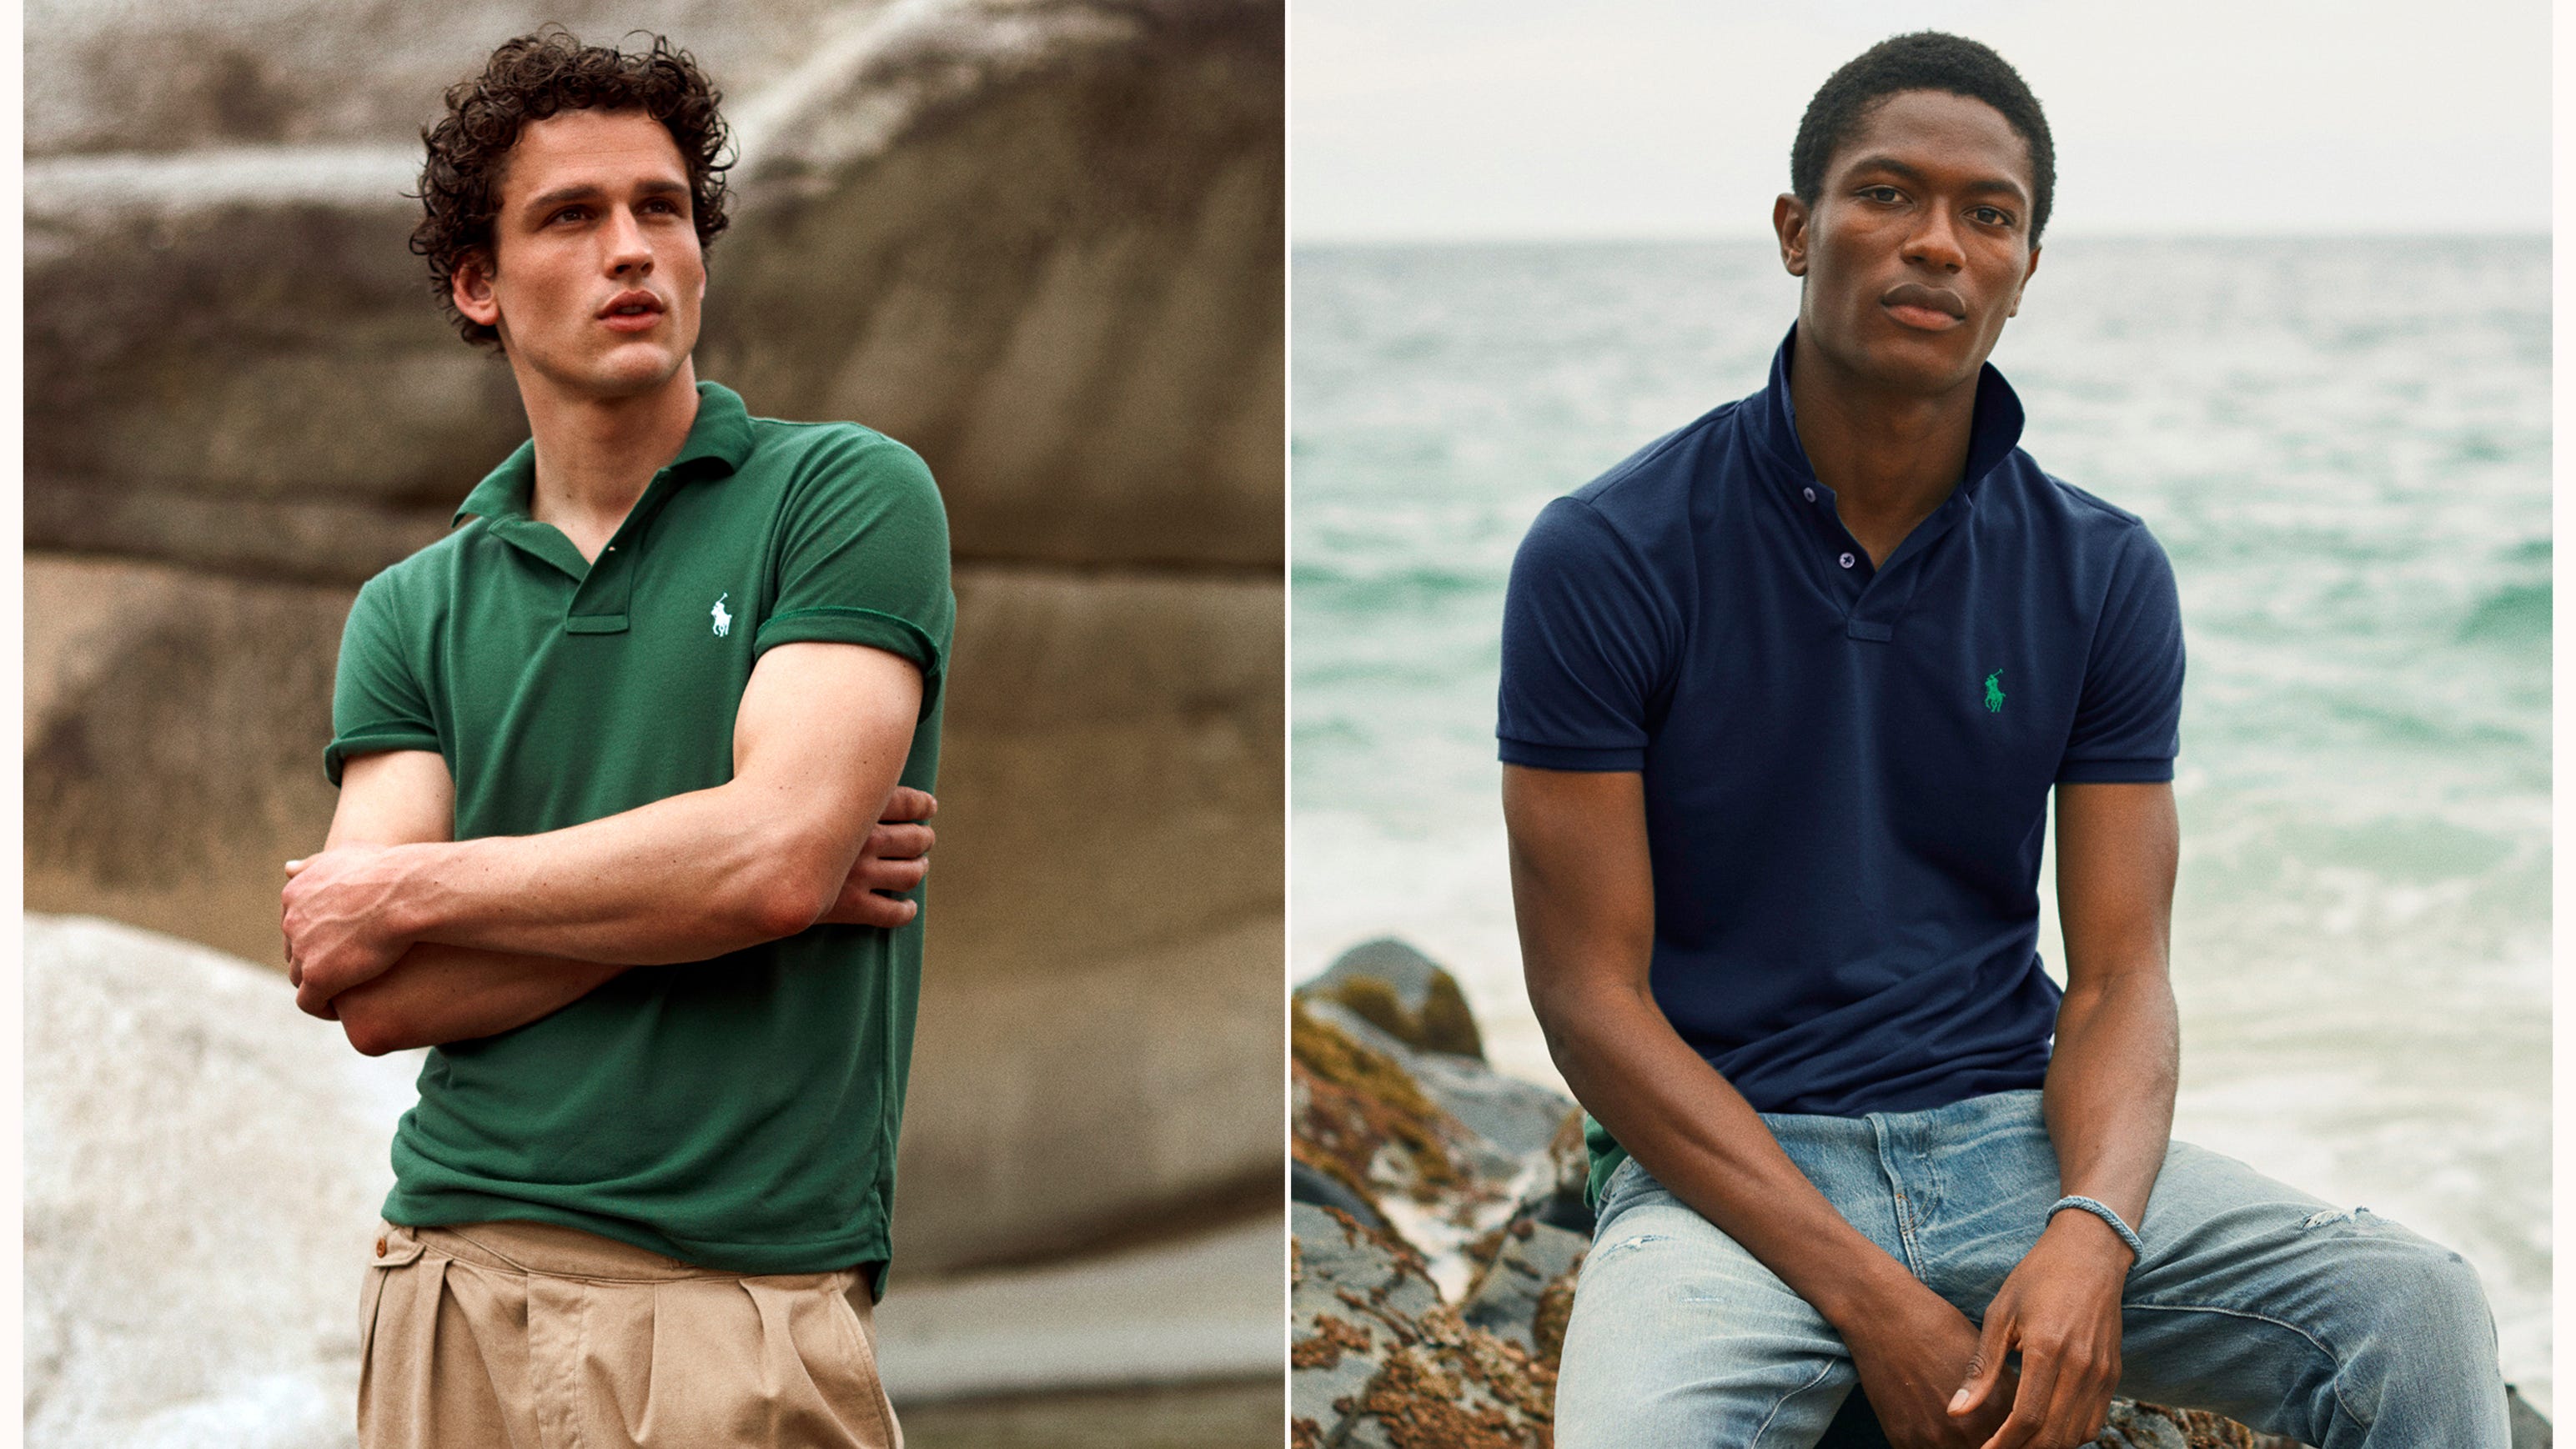 Ralph Lauren unveils Polo shirts made from recycled plastic bottles